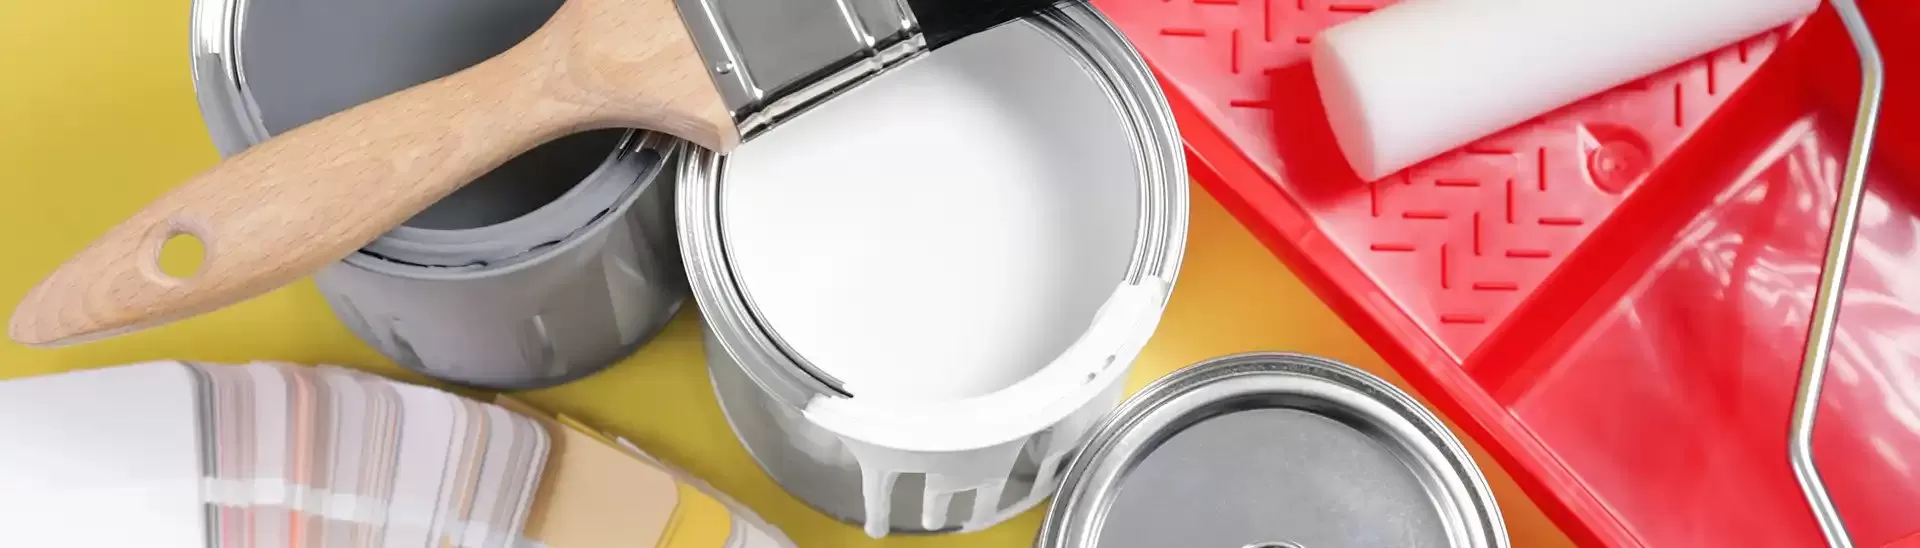 The Ultimate Guide to House Painting Tools and Equipment